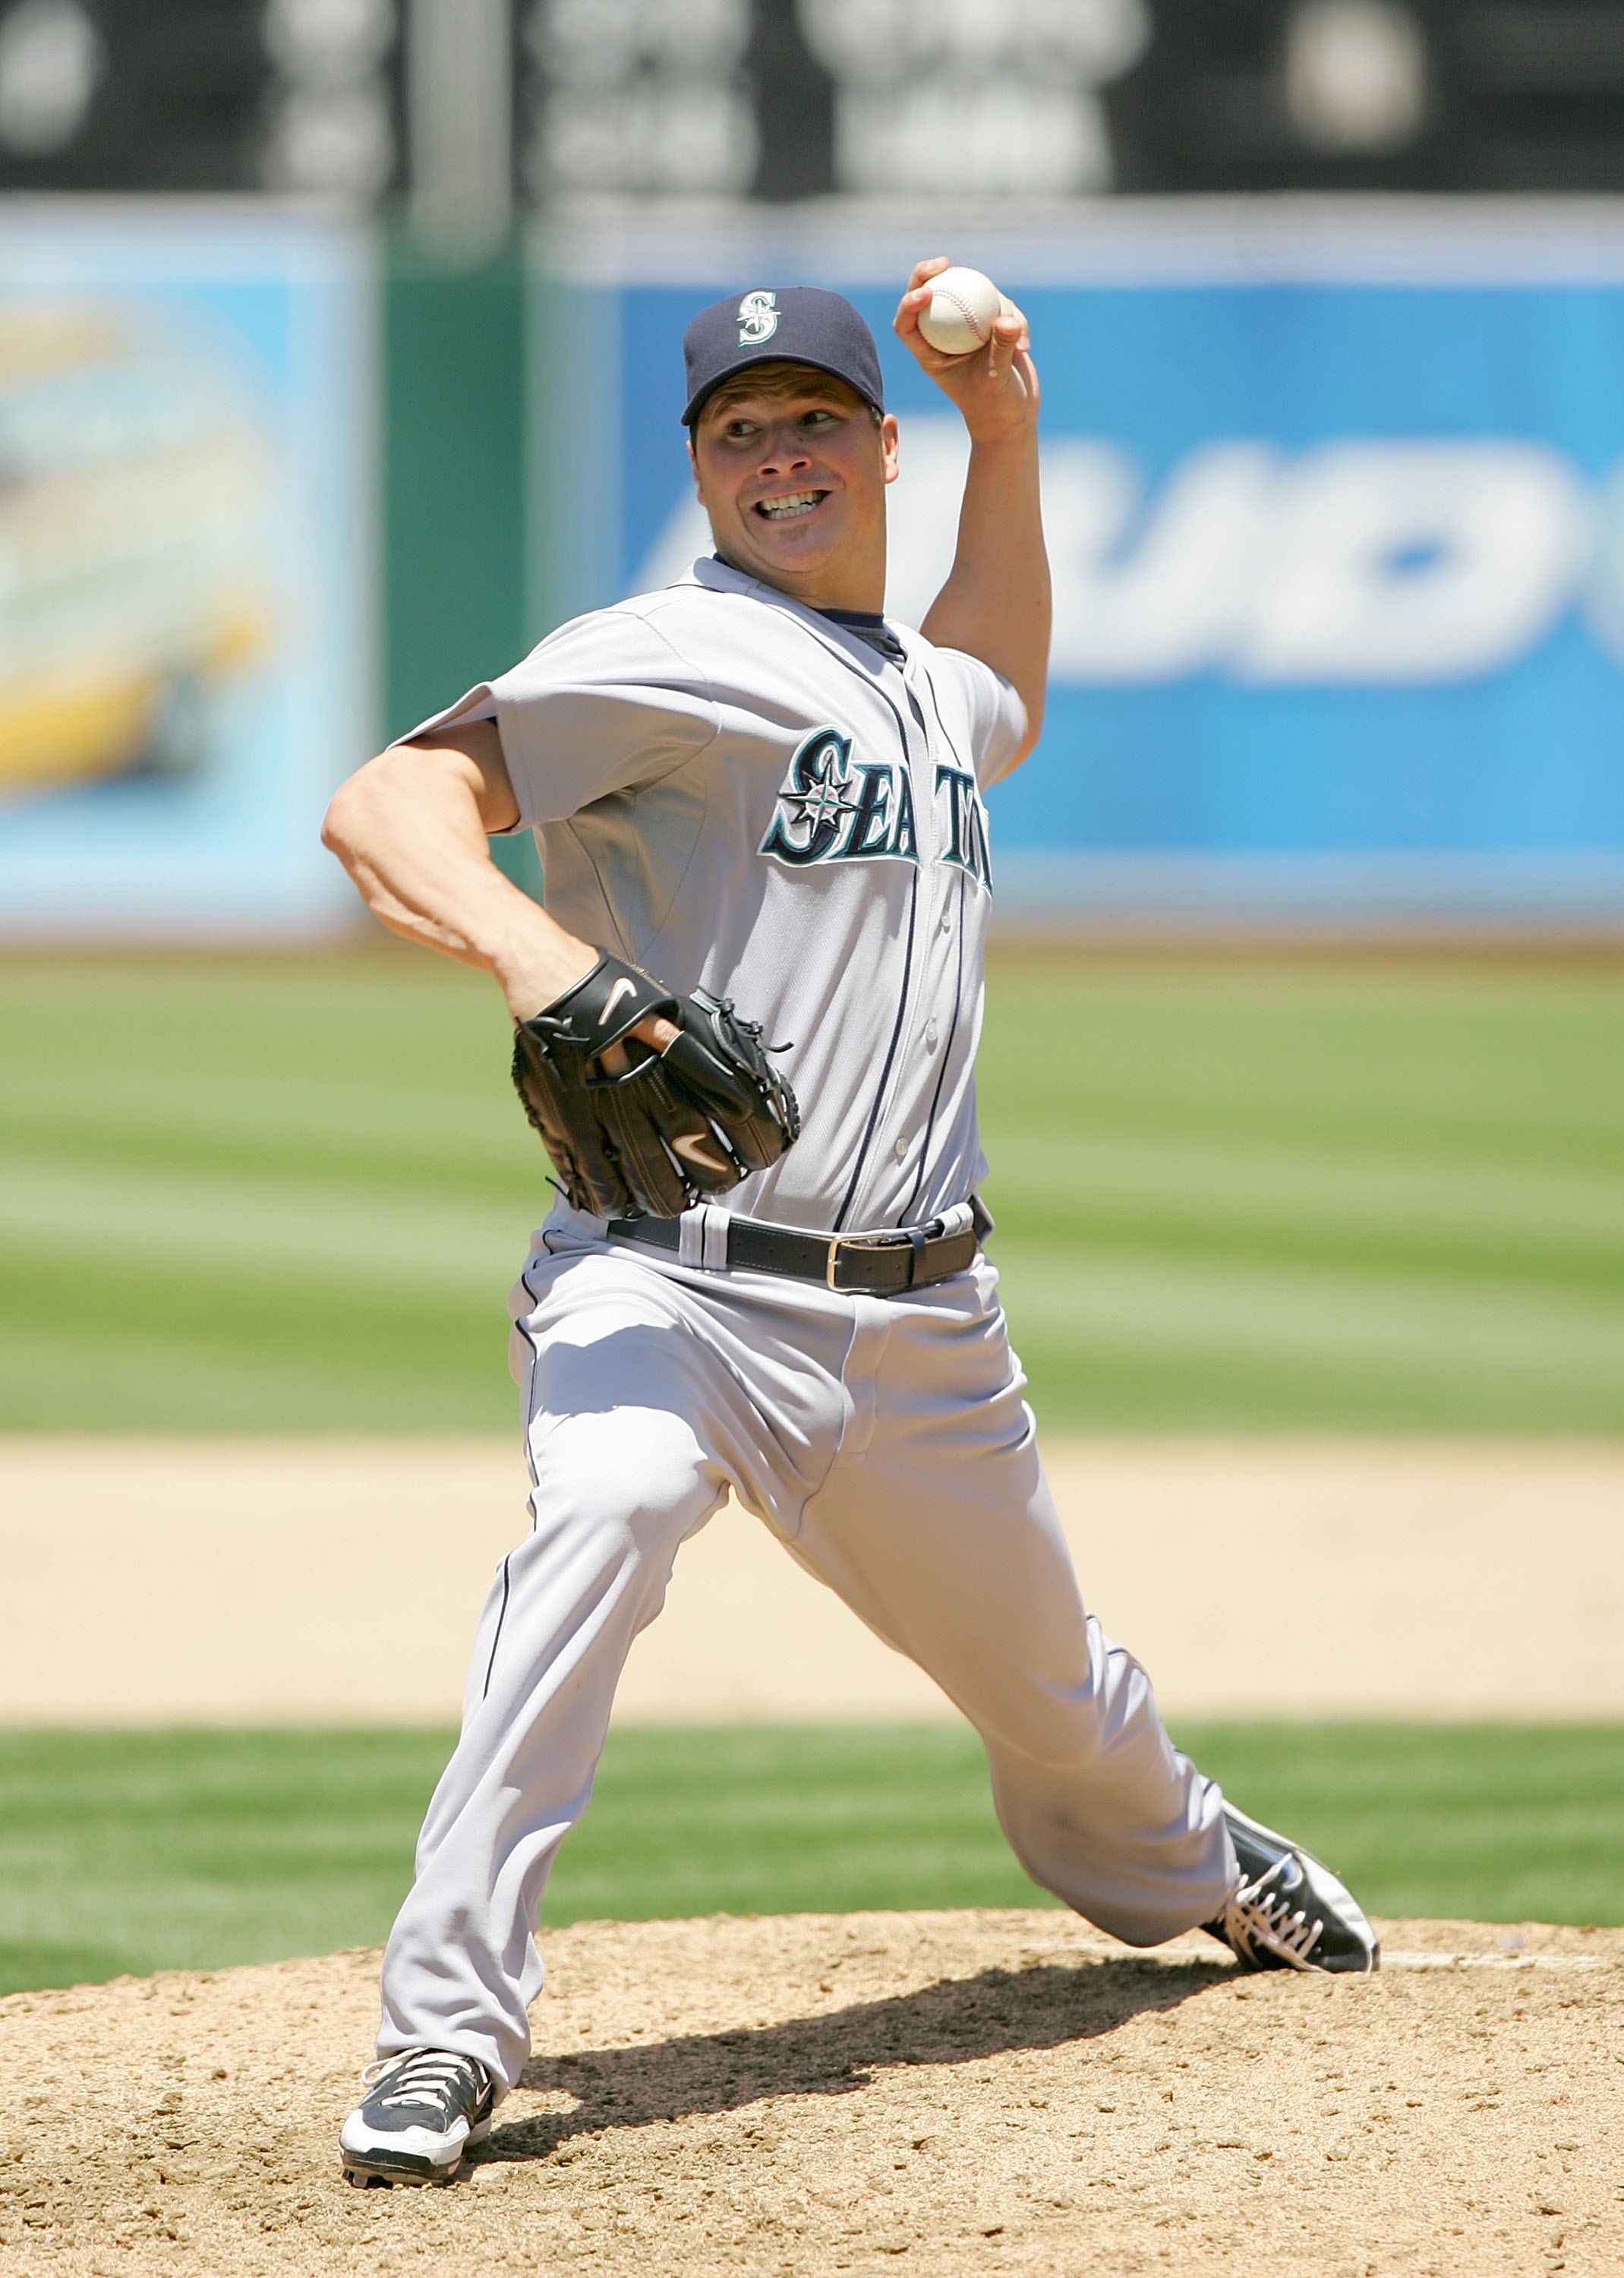 OAKLAND, CA - MAY 27:  Erik Bedard #45 of the Seattle Mariners pitches against the Oakland Athletics at the Oakland Coliseum on May 27, 2009 in Oakland, California.  (Photo by Ezra Shaw/Getty Images)